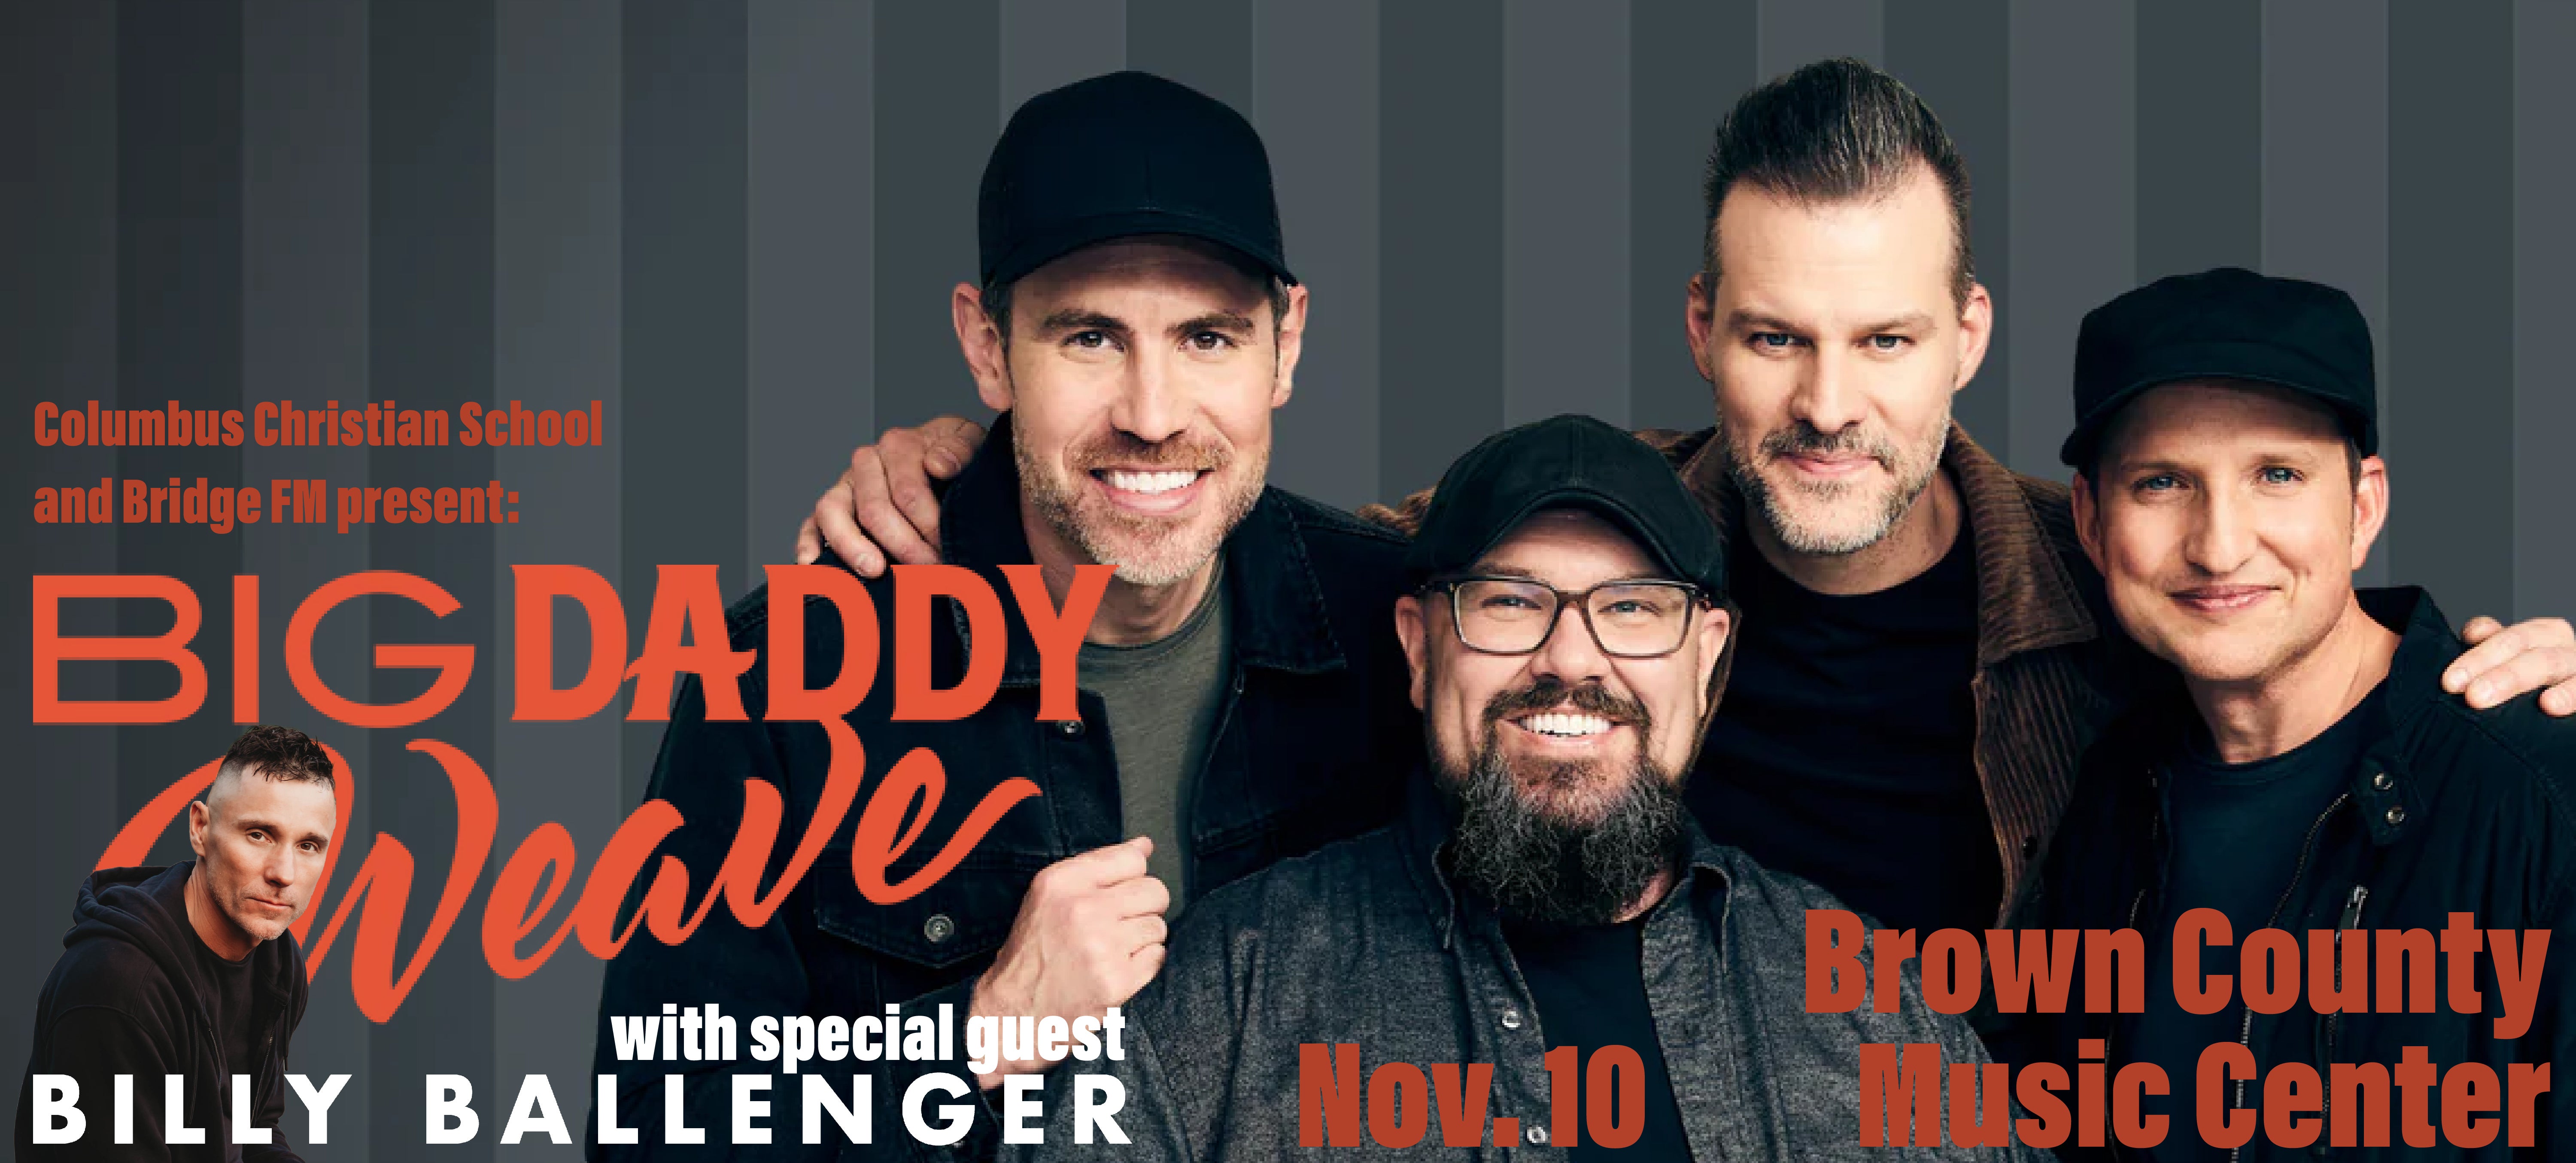 Big Daddy Weave with Special Guest Billy Ballenger